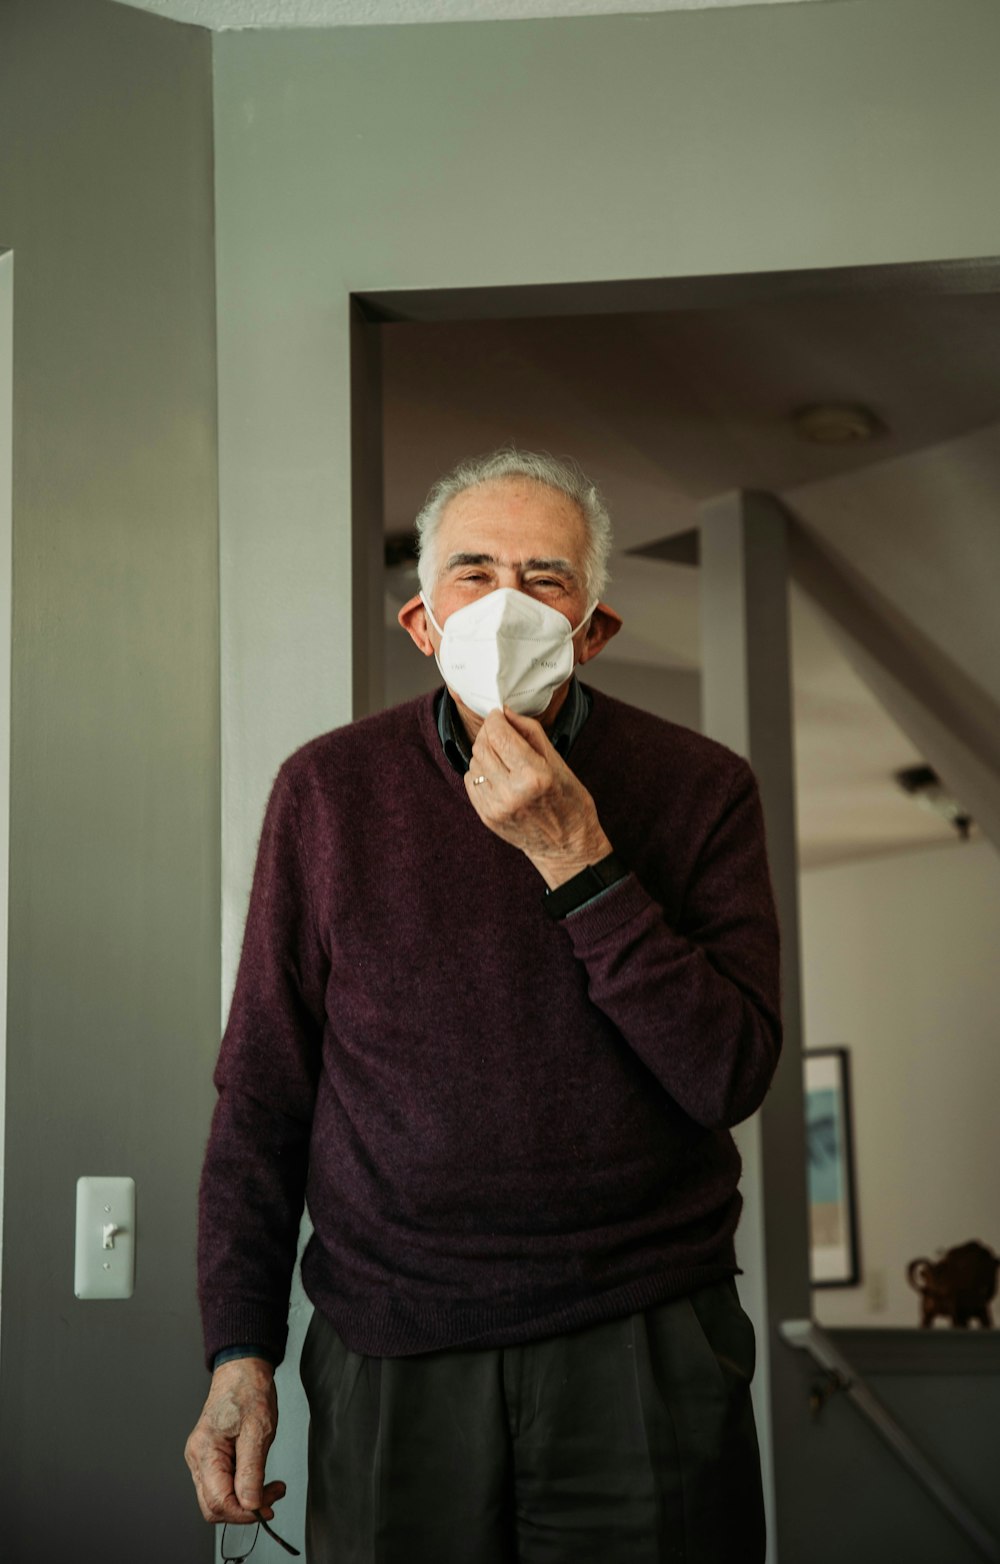 a man in a sweater is holding a napkin to his mouth